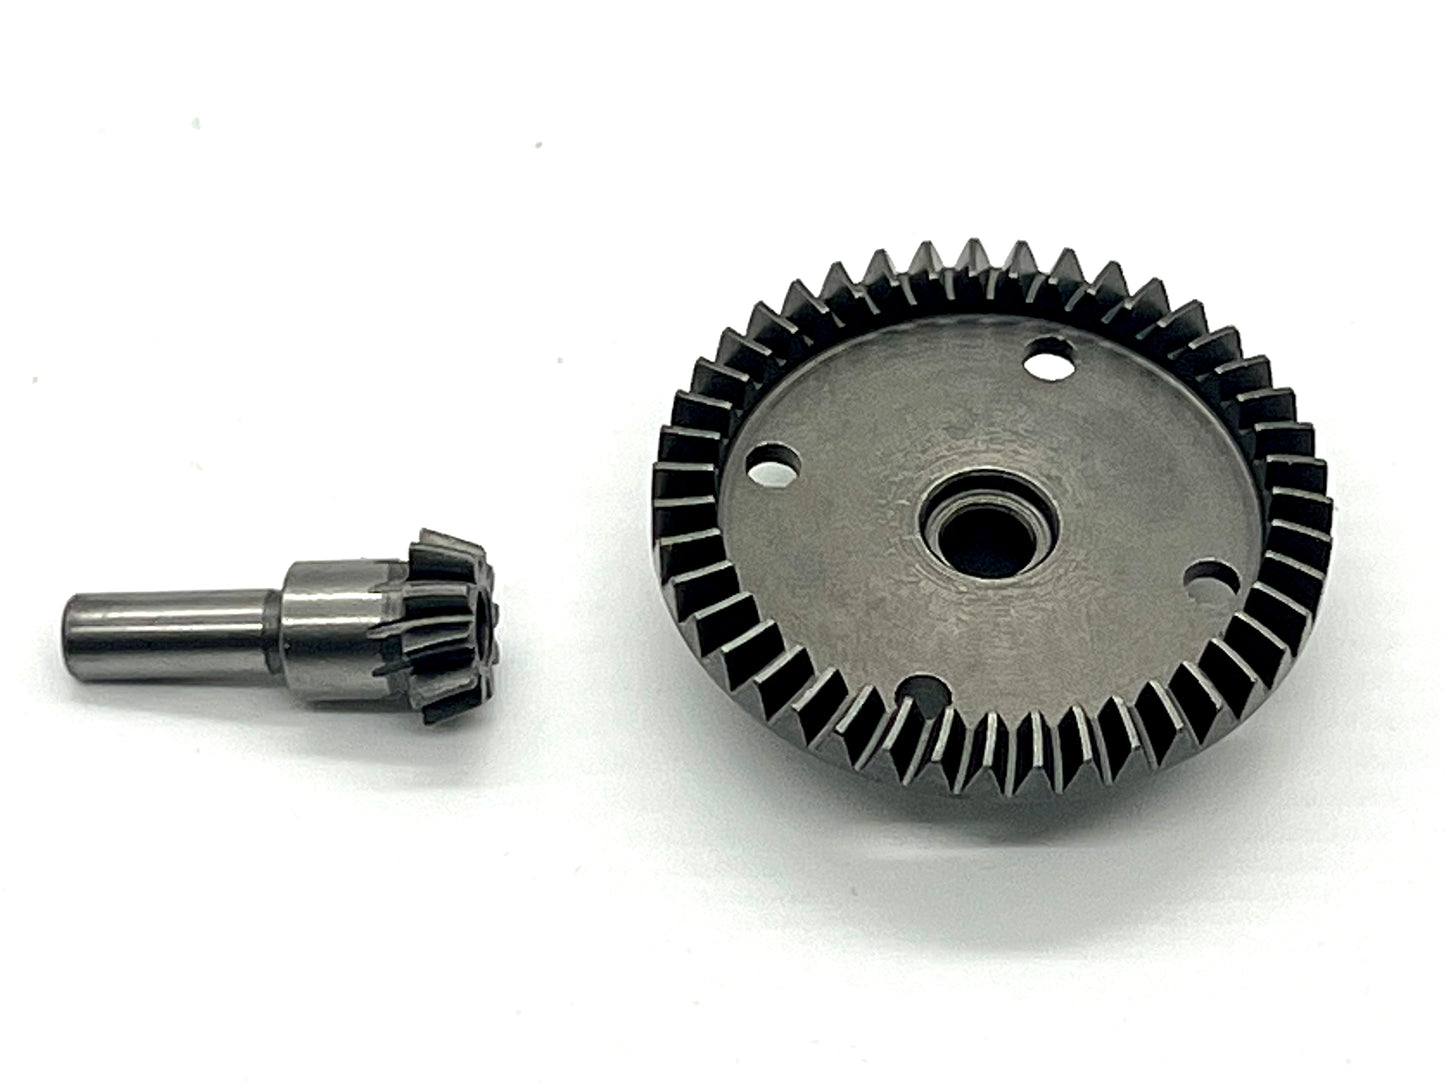 Vitavon Ring and Pinion gears for Arrma 6s 31mm Diff vehicles NOT EXB